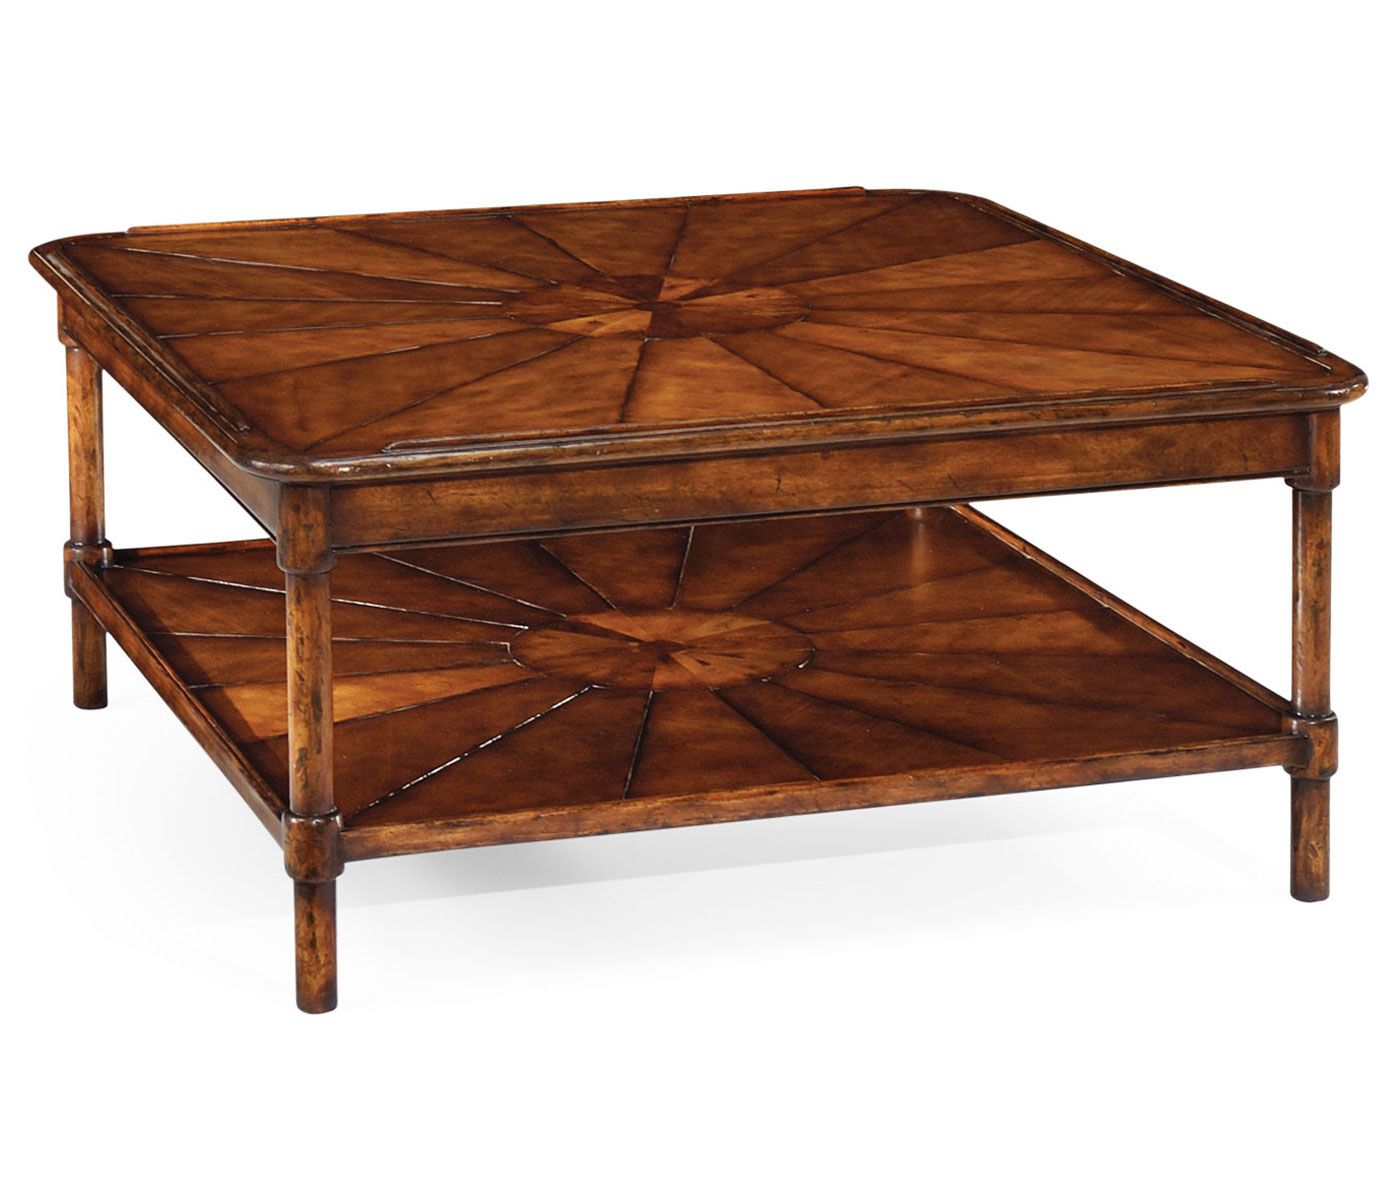 Square Rustic Walnut Coffee Table Regarding Hand Finished Walnut Coffee Tables (View 8 of 15)